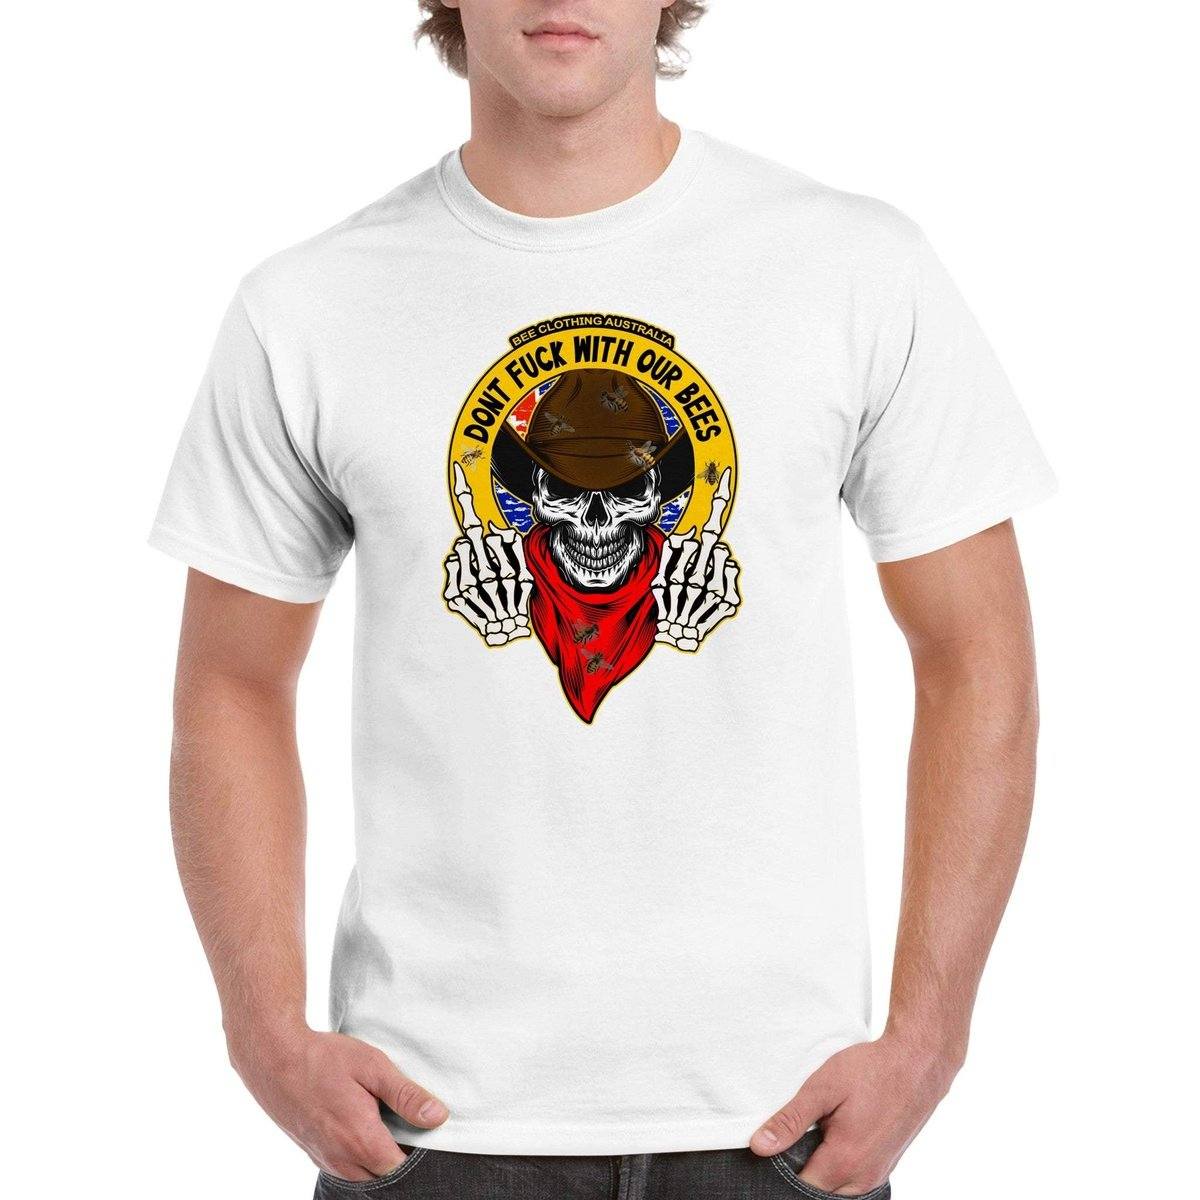 Dont Fuck With Our Bees T-Shirt - beekeeper Tshirt - Unisex Crewneck T-shirt Australia Online Color White / S